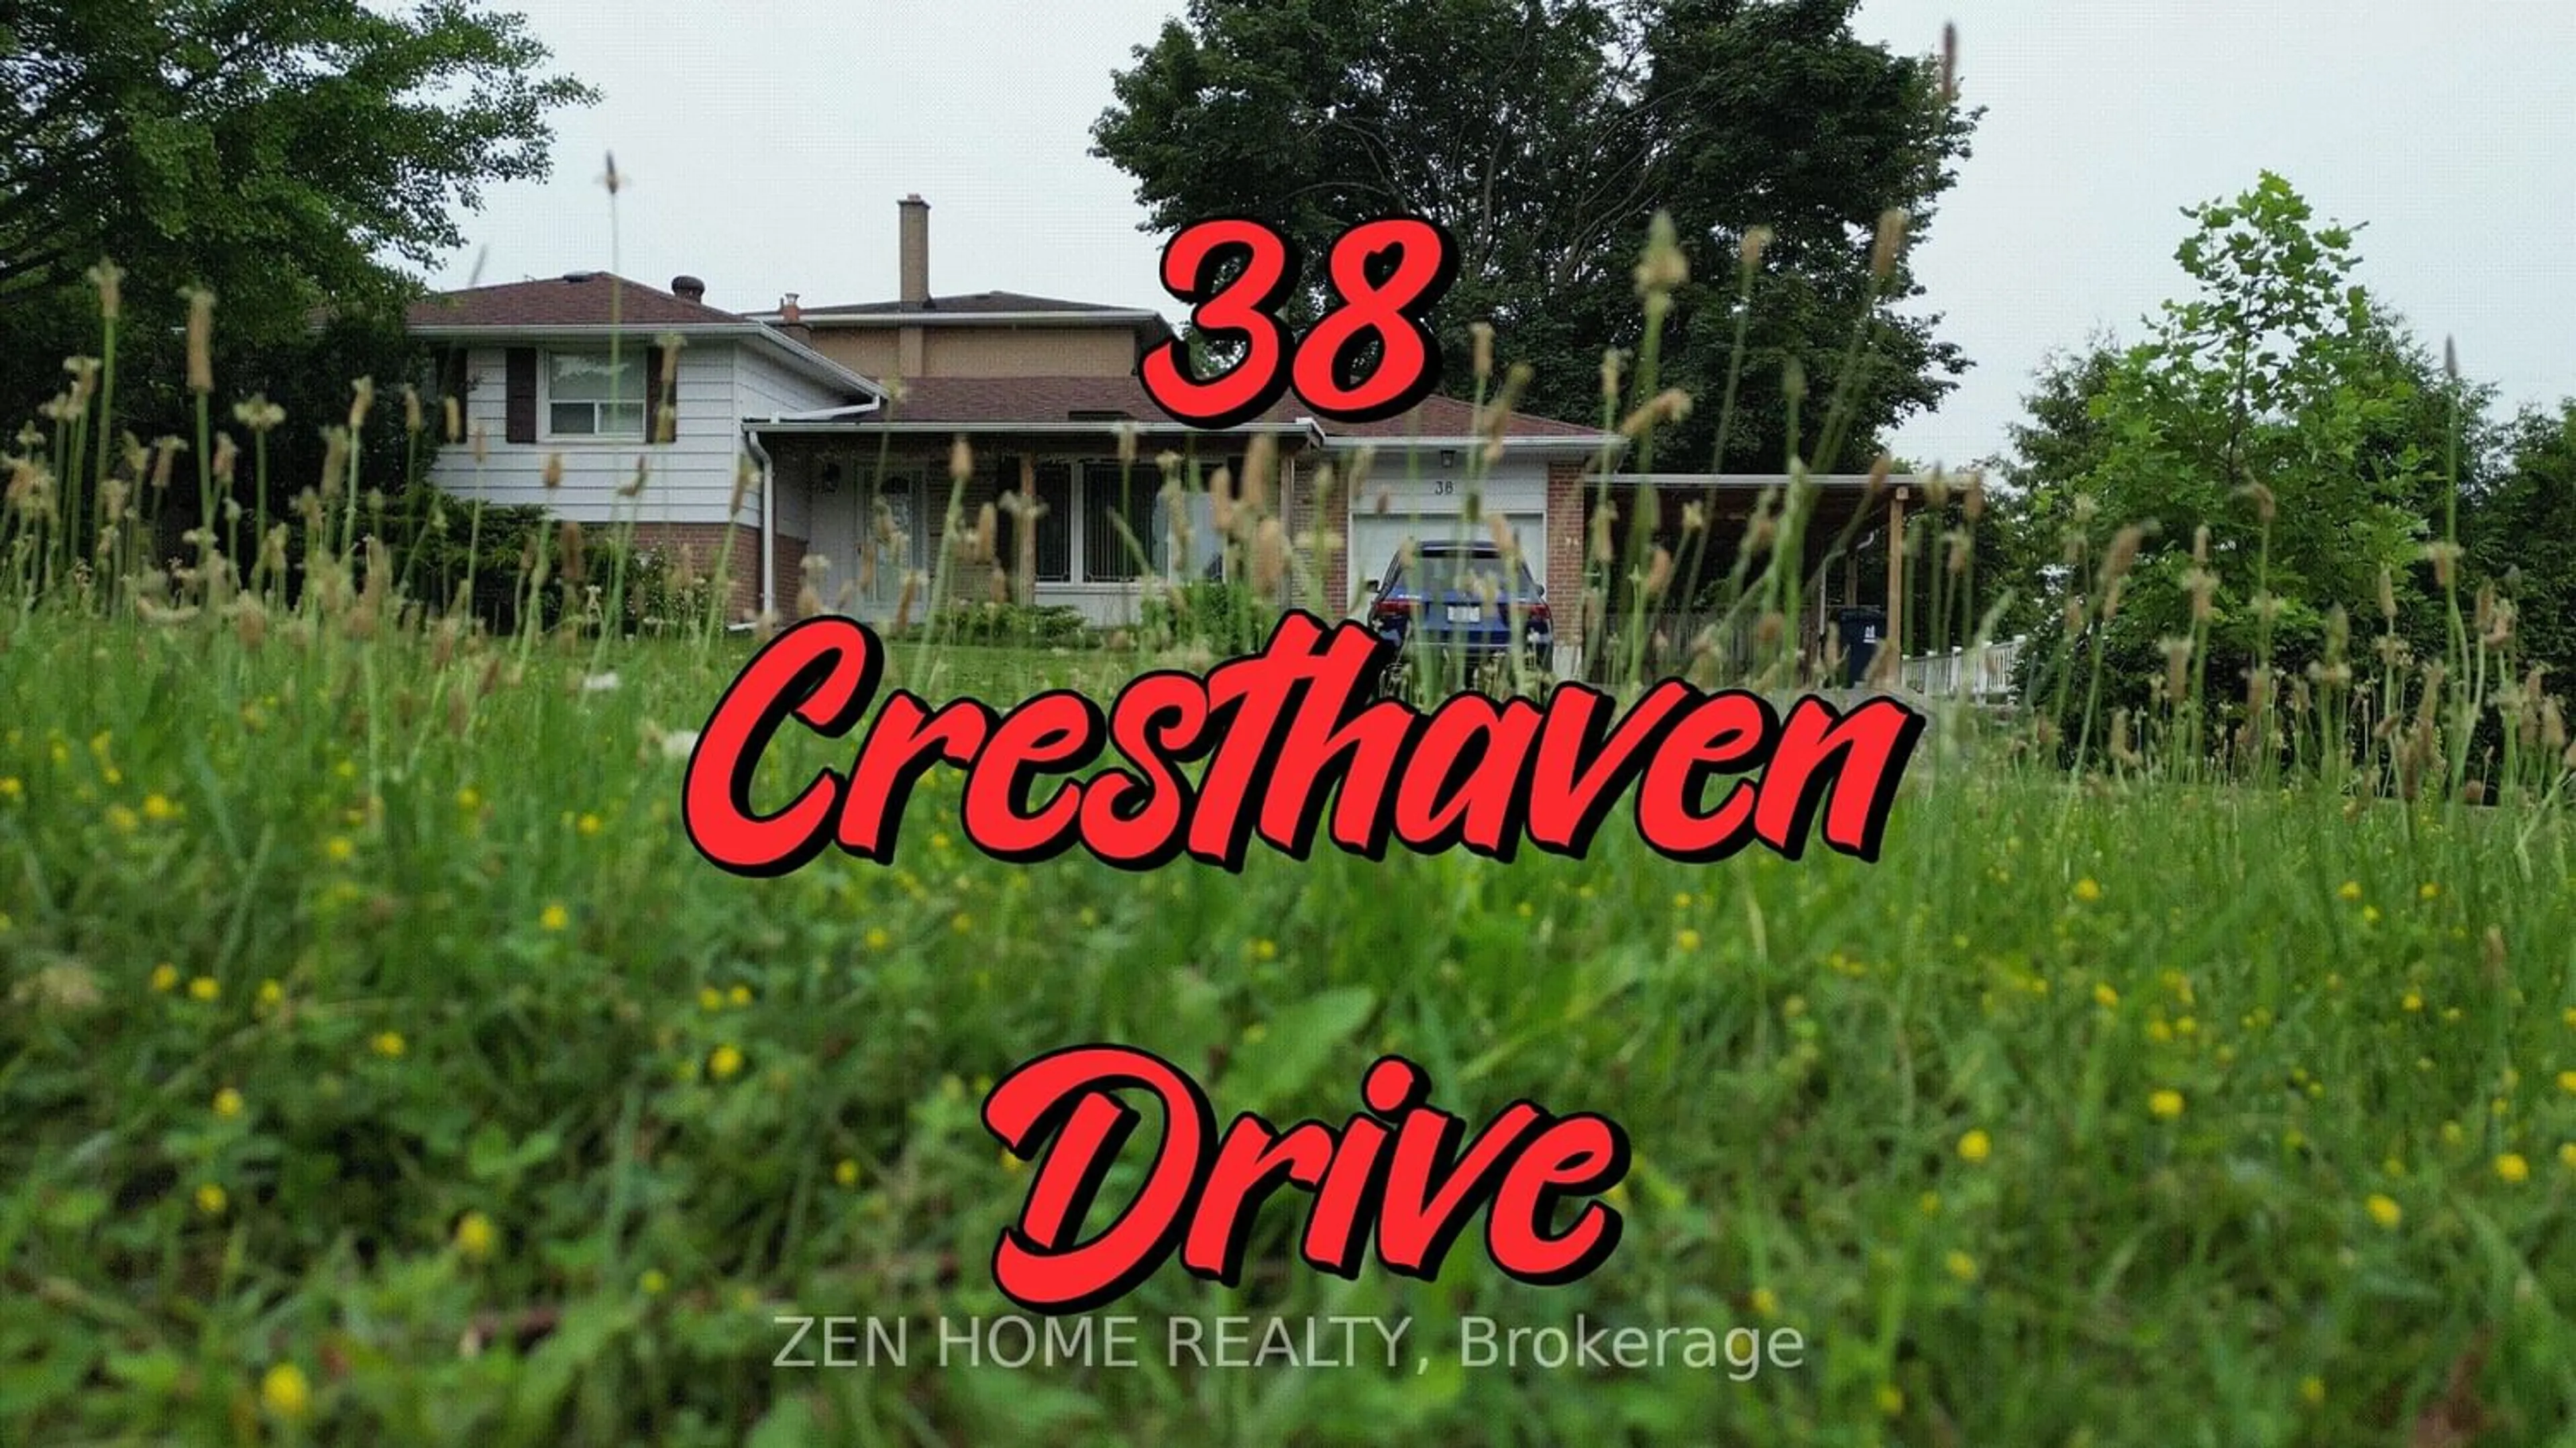 Street view for 38 Cresthaven Dr, Toronto Ontario M2H 1M1